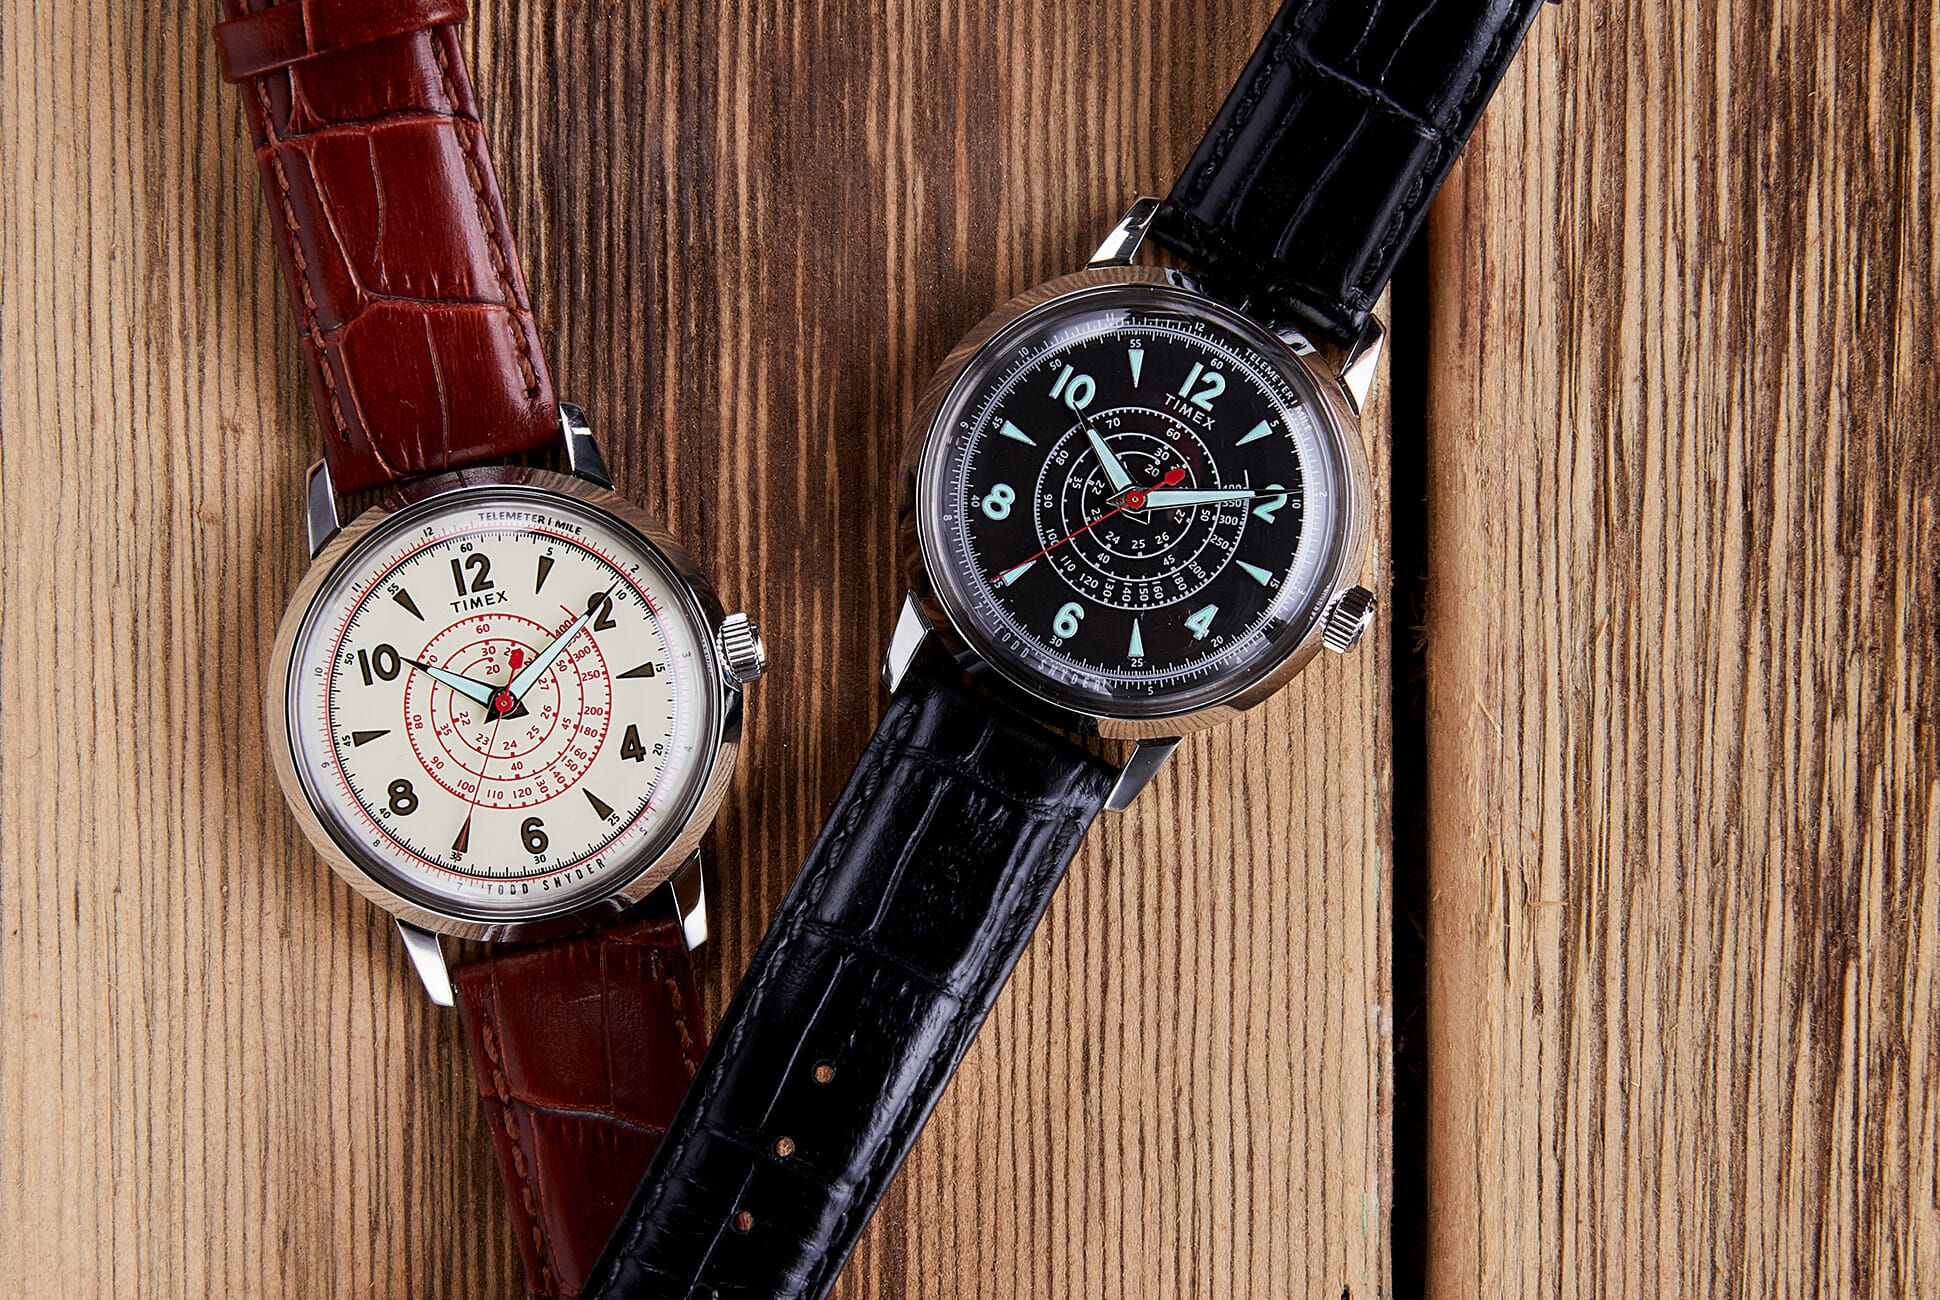 The New Timex/Todd Snyder Beekman Celebrates Racing Heritage